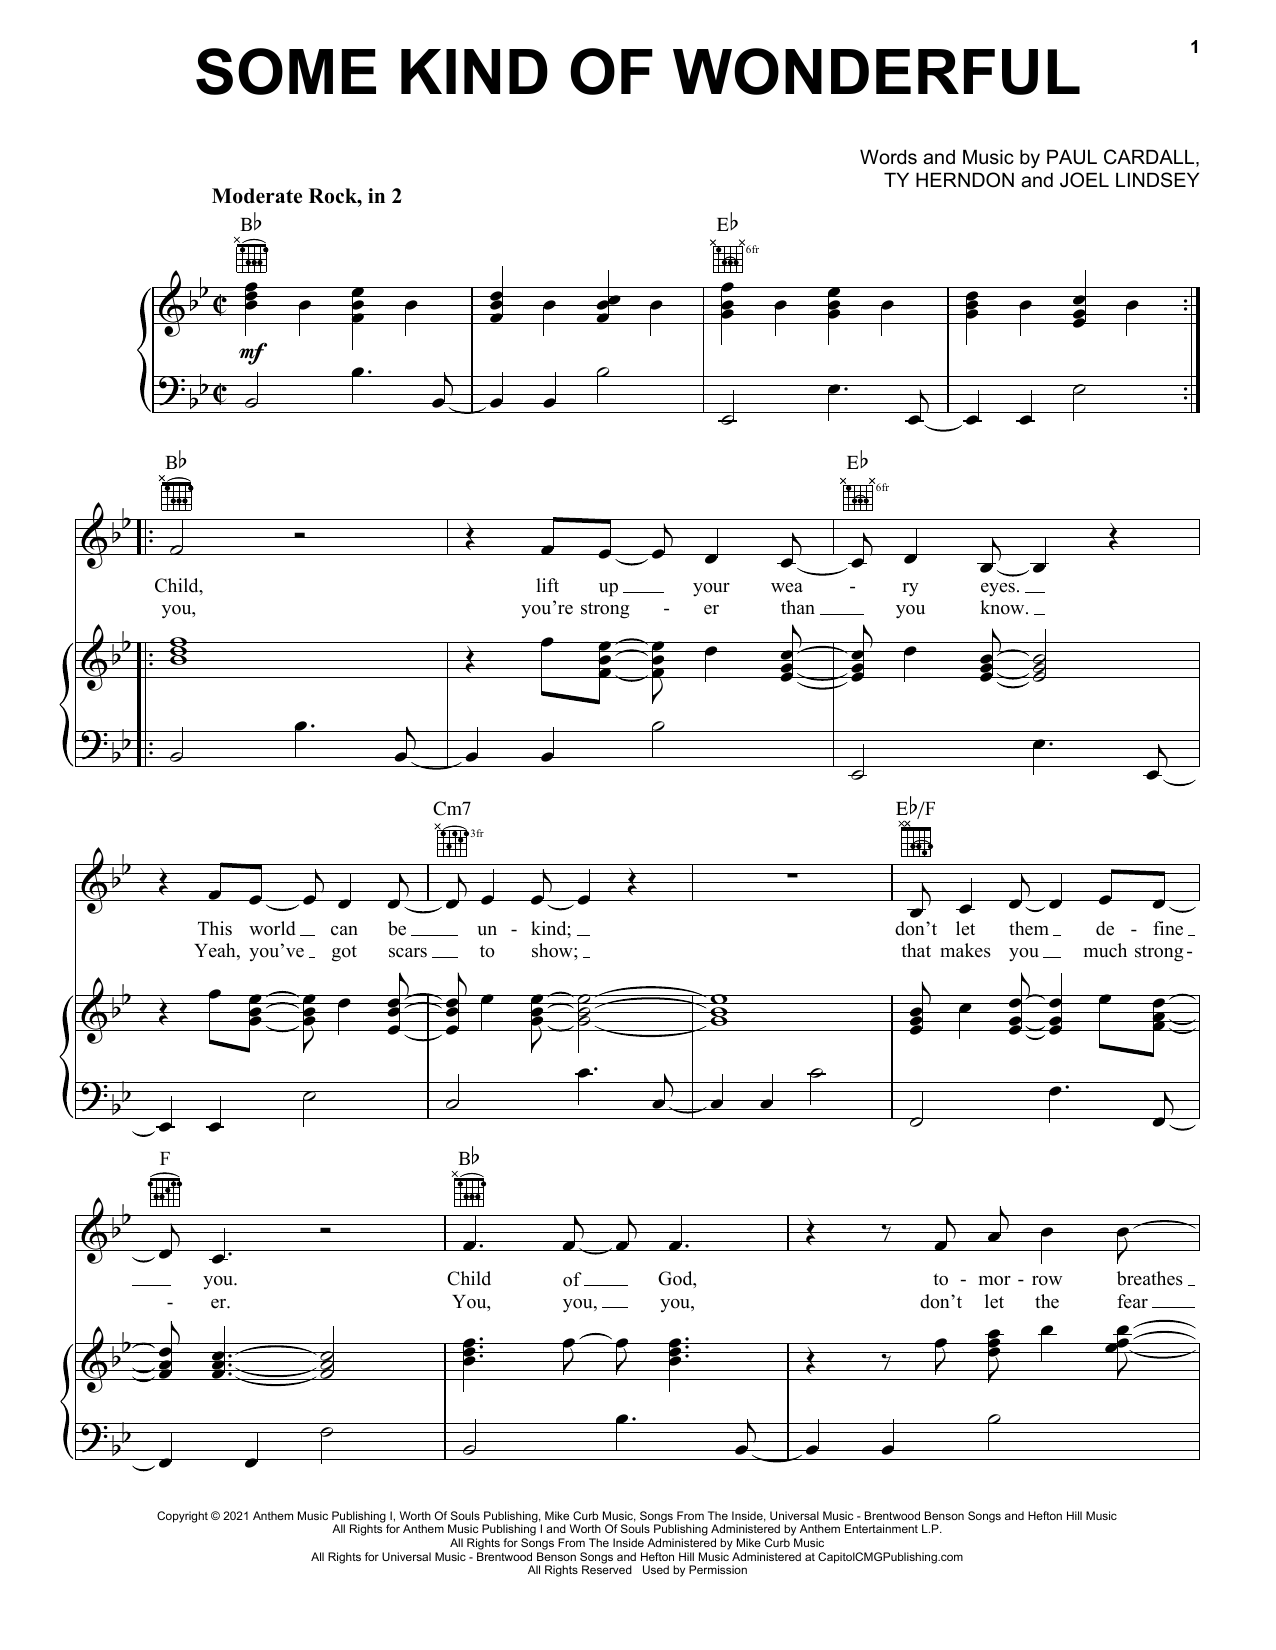 Download Paul Cardall and Ty Herndon Some Kind Of Wonderful Sheet Music